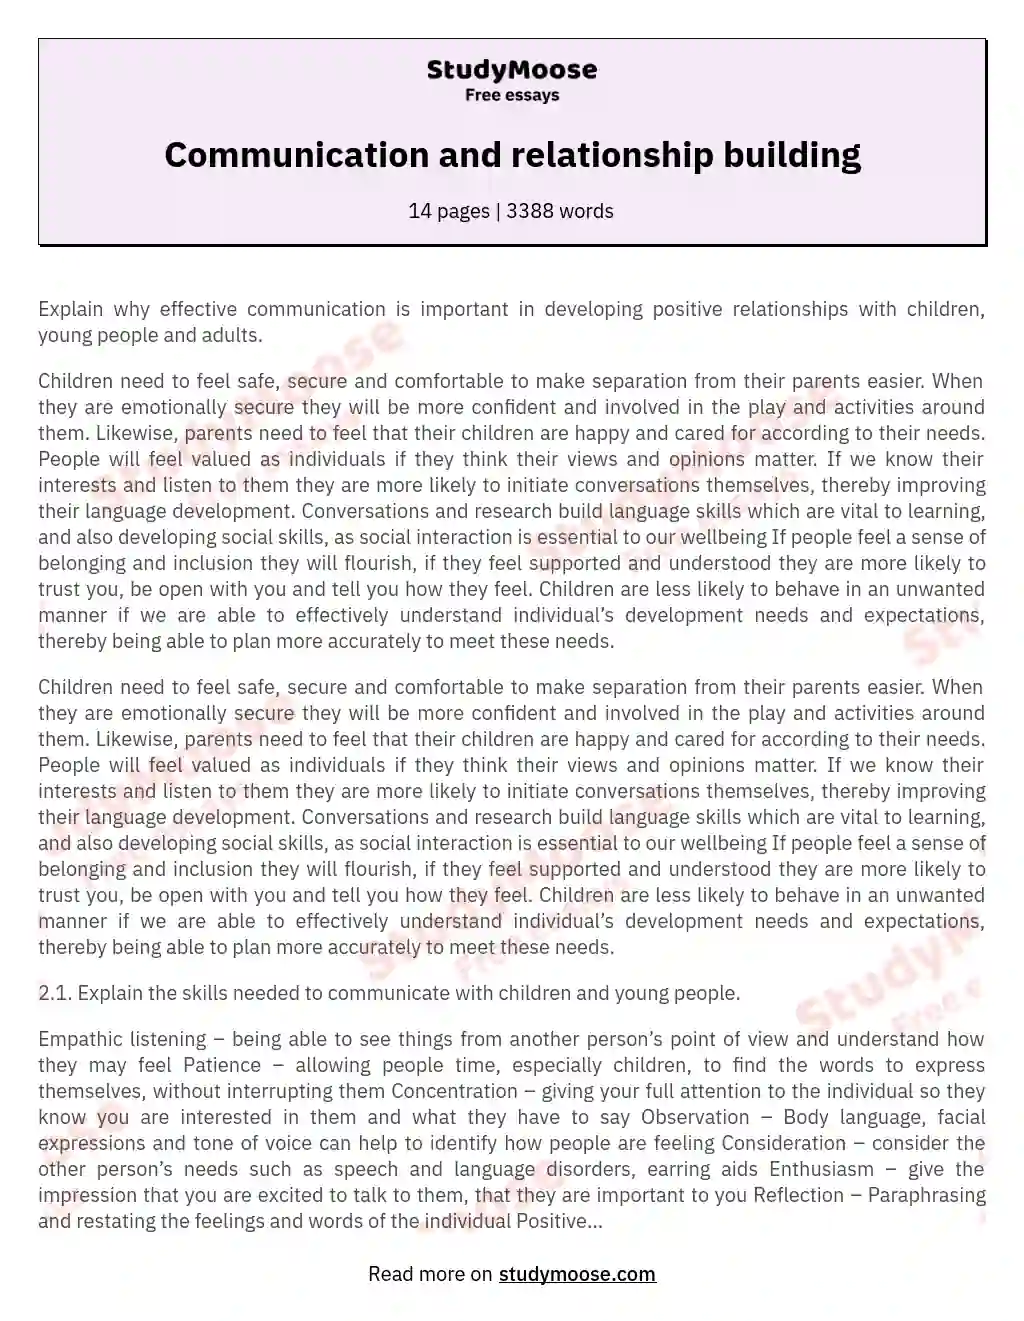 Communication and relationship building essay